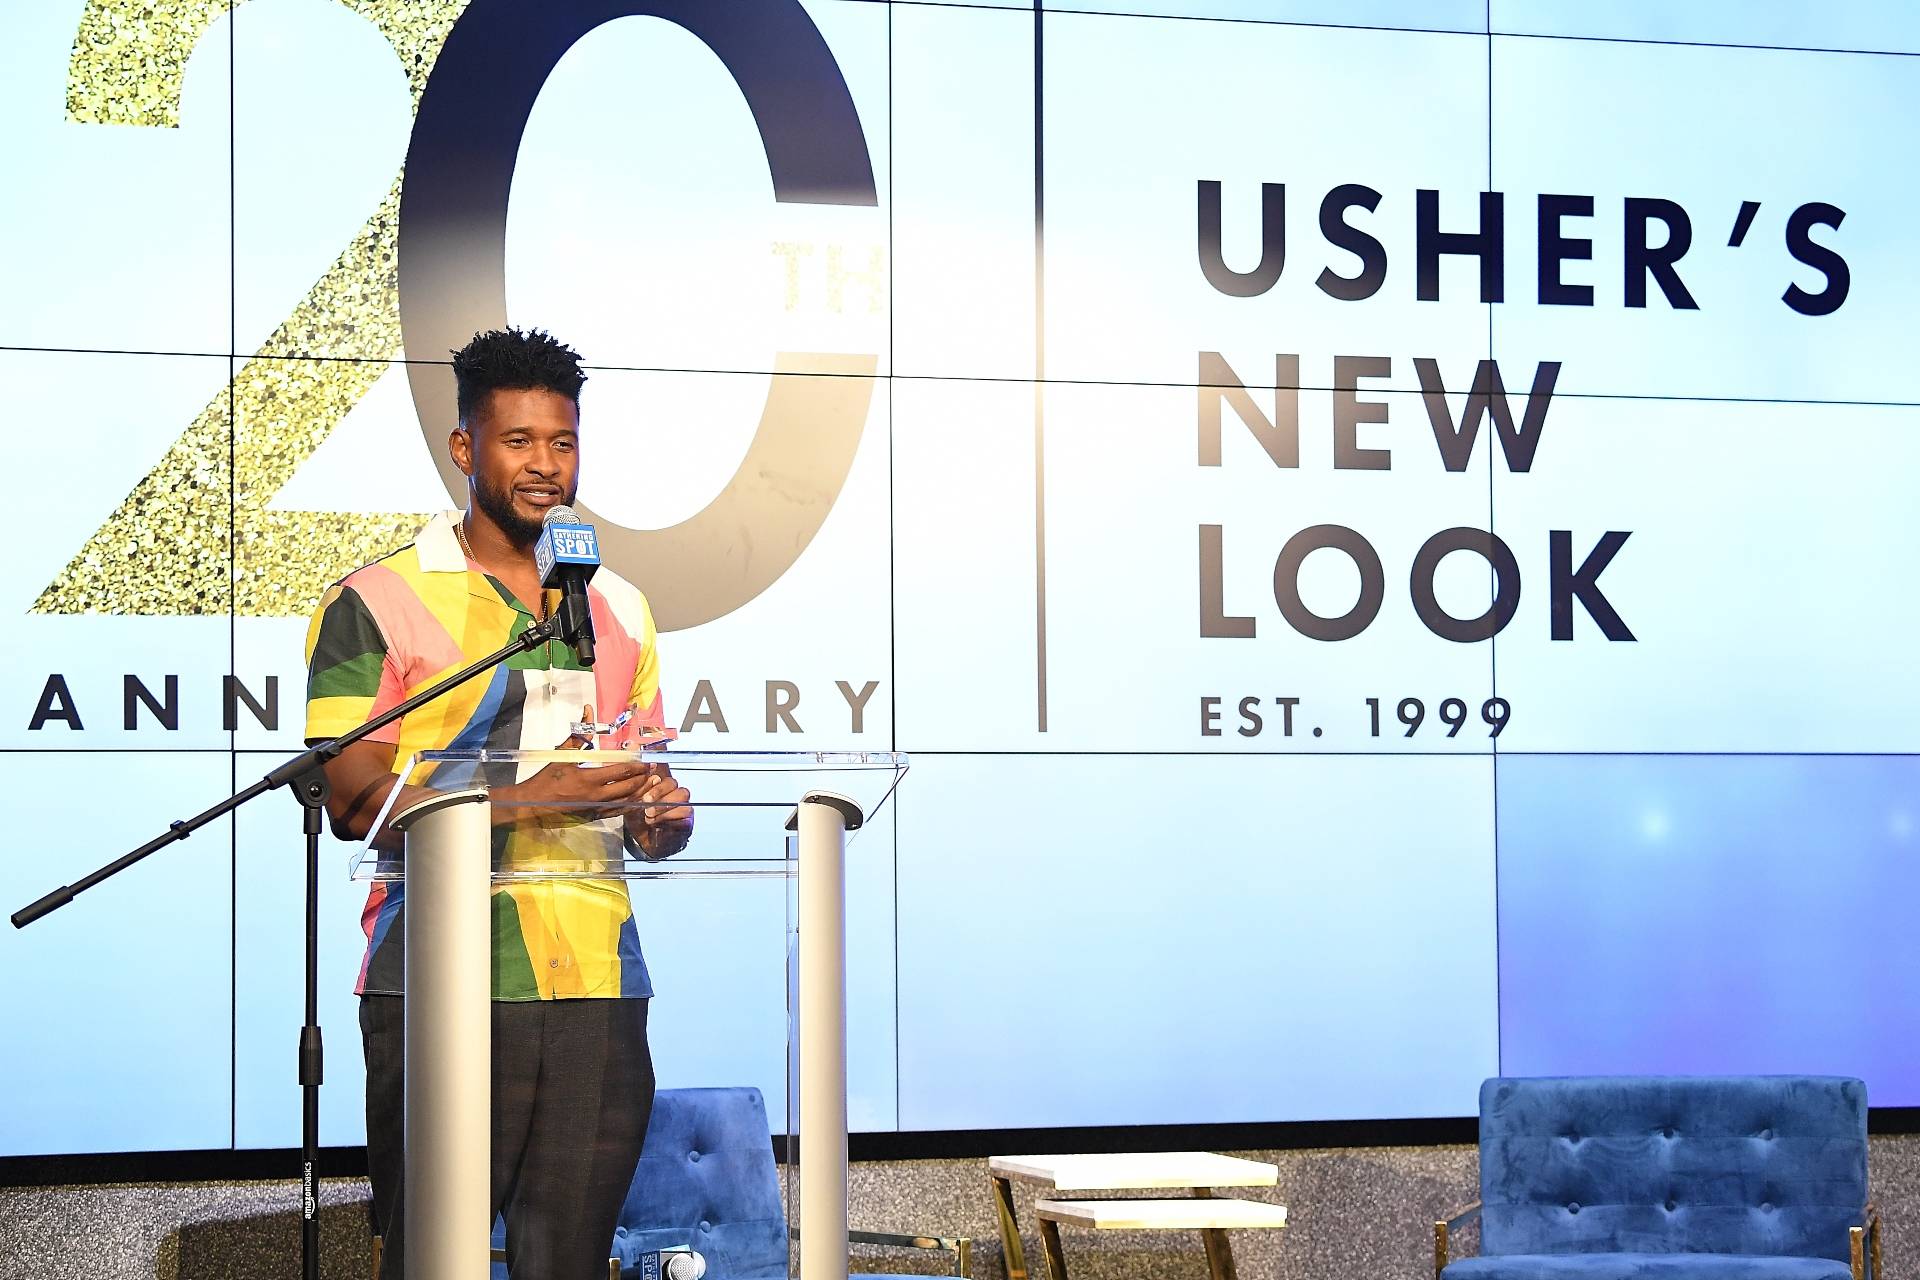 Usher’s Nonprofit ‘New Look’ Earns $500K Grant For Financial Literacy Programming